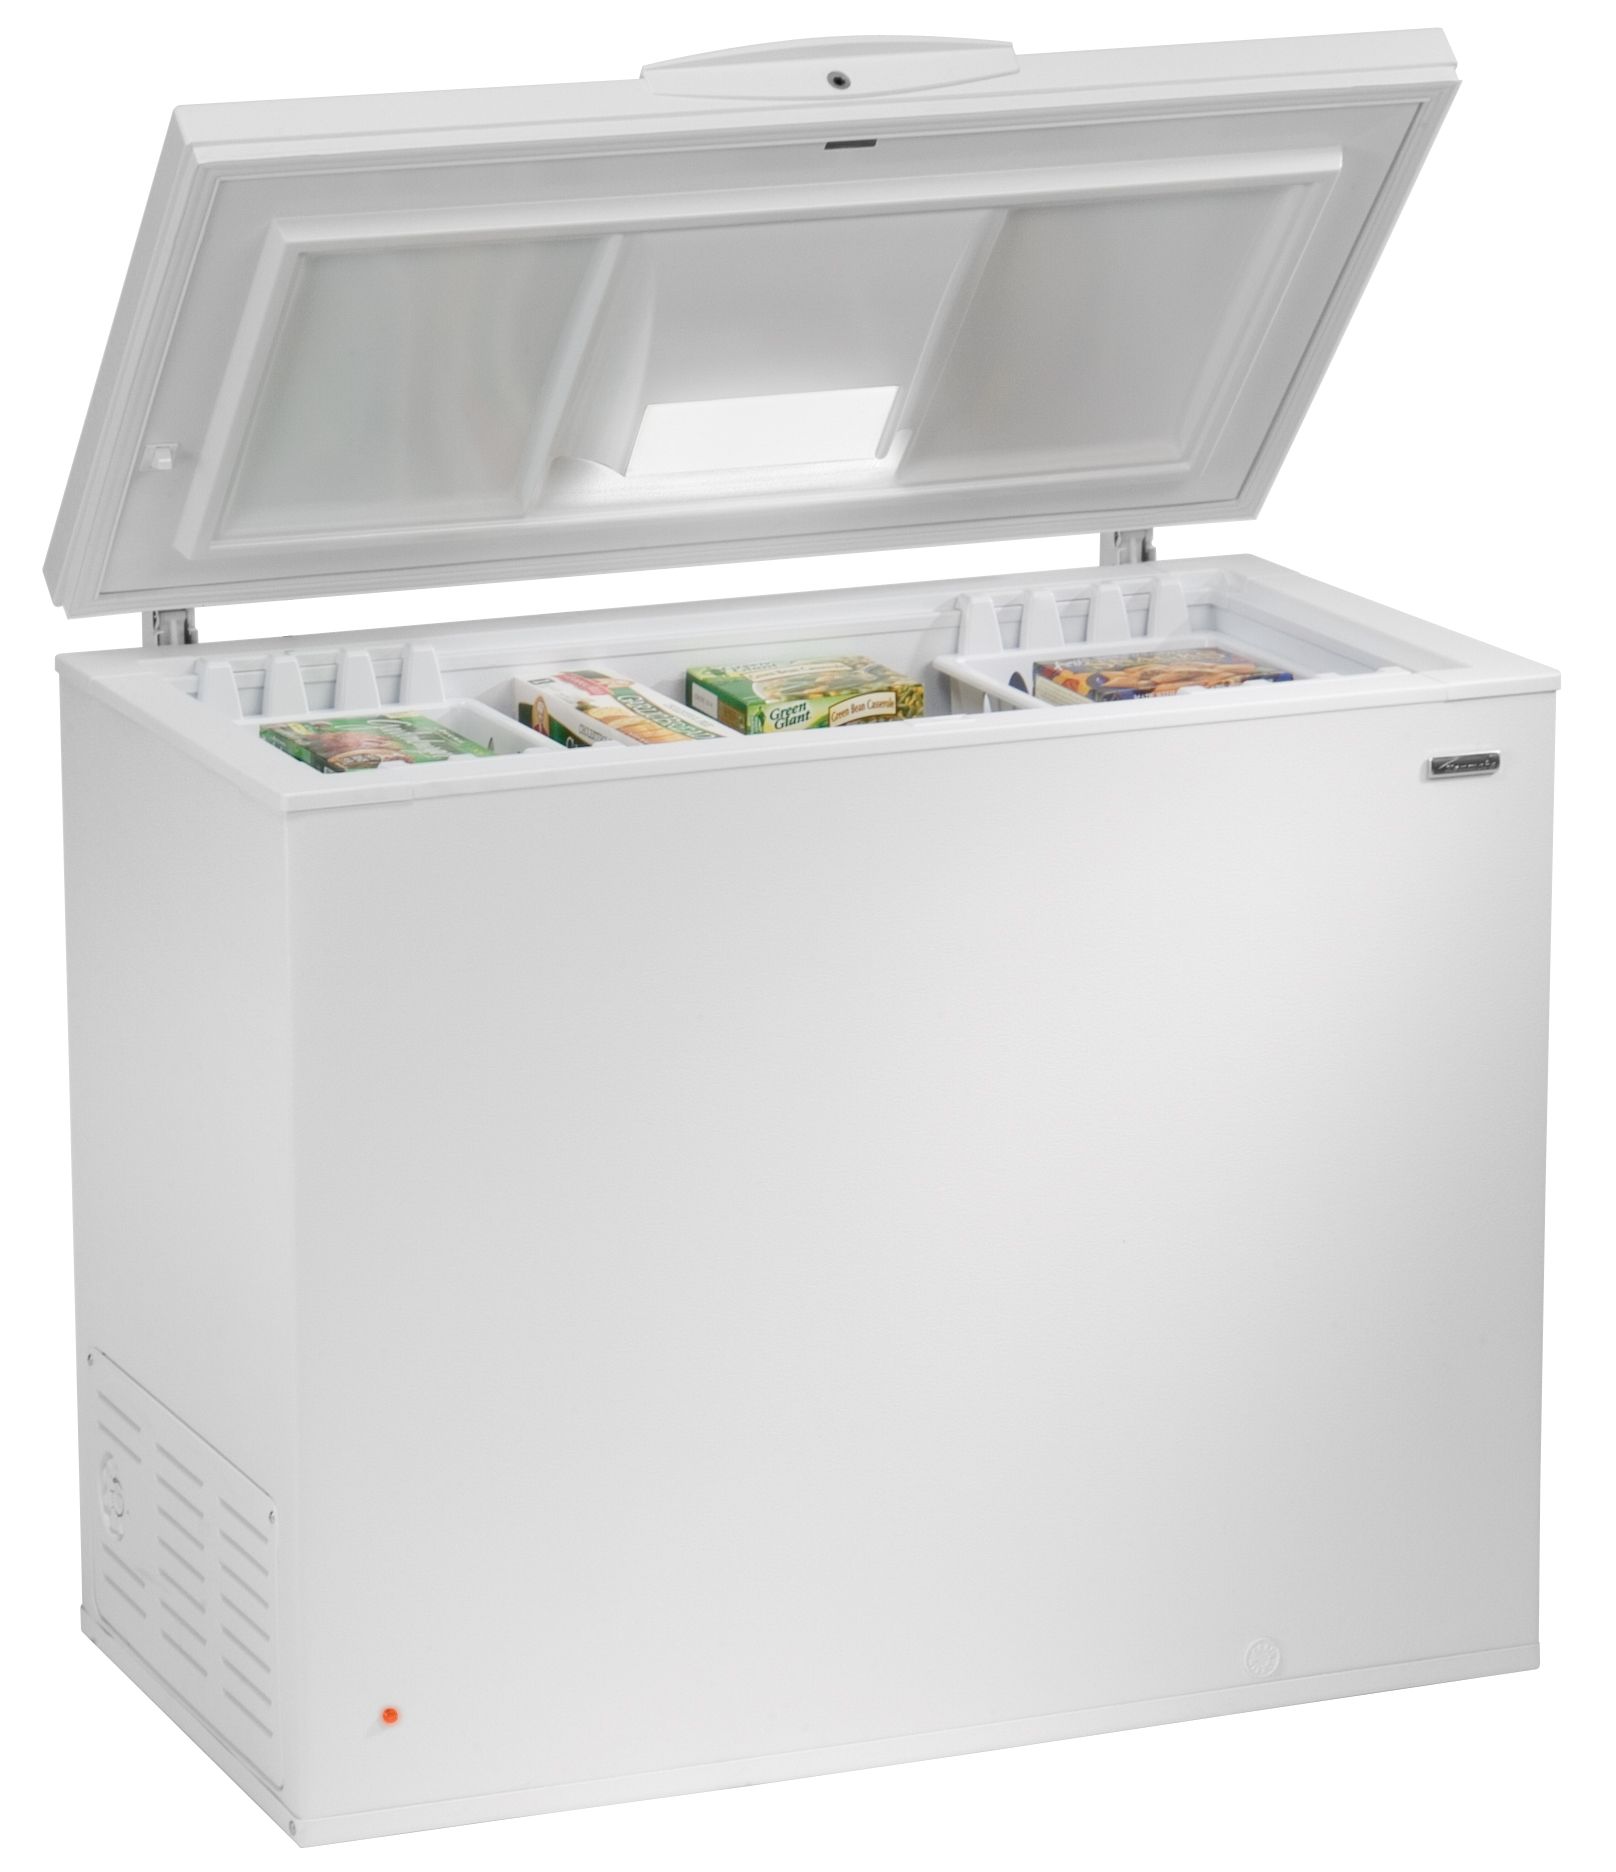 10 Cubic Feet Chest Style Freezer From Rental